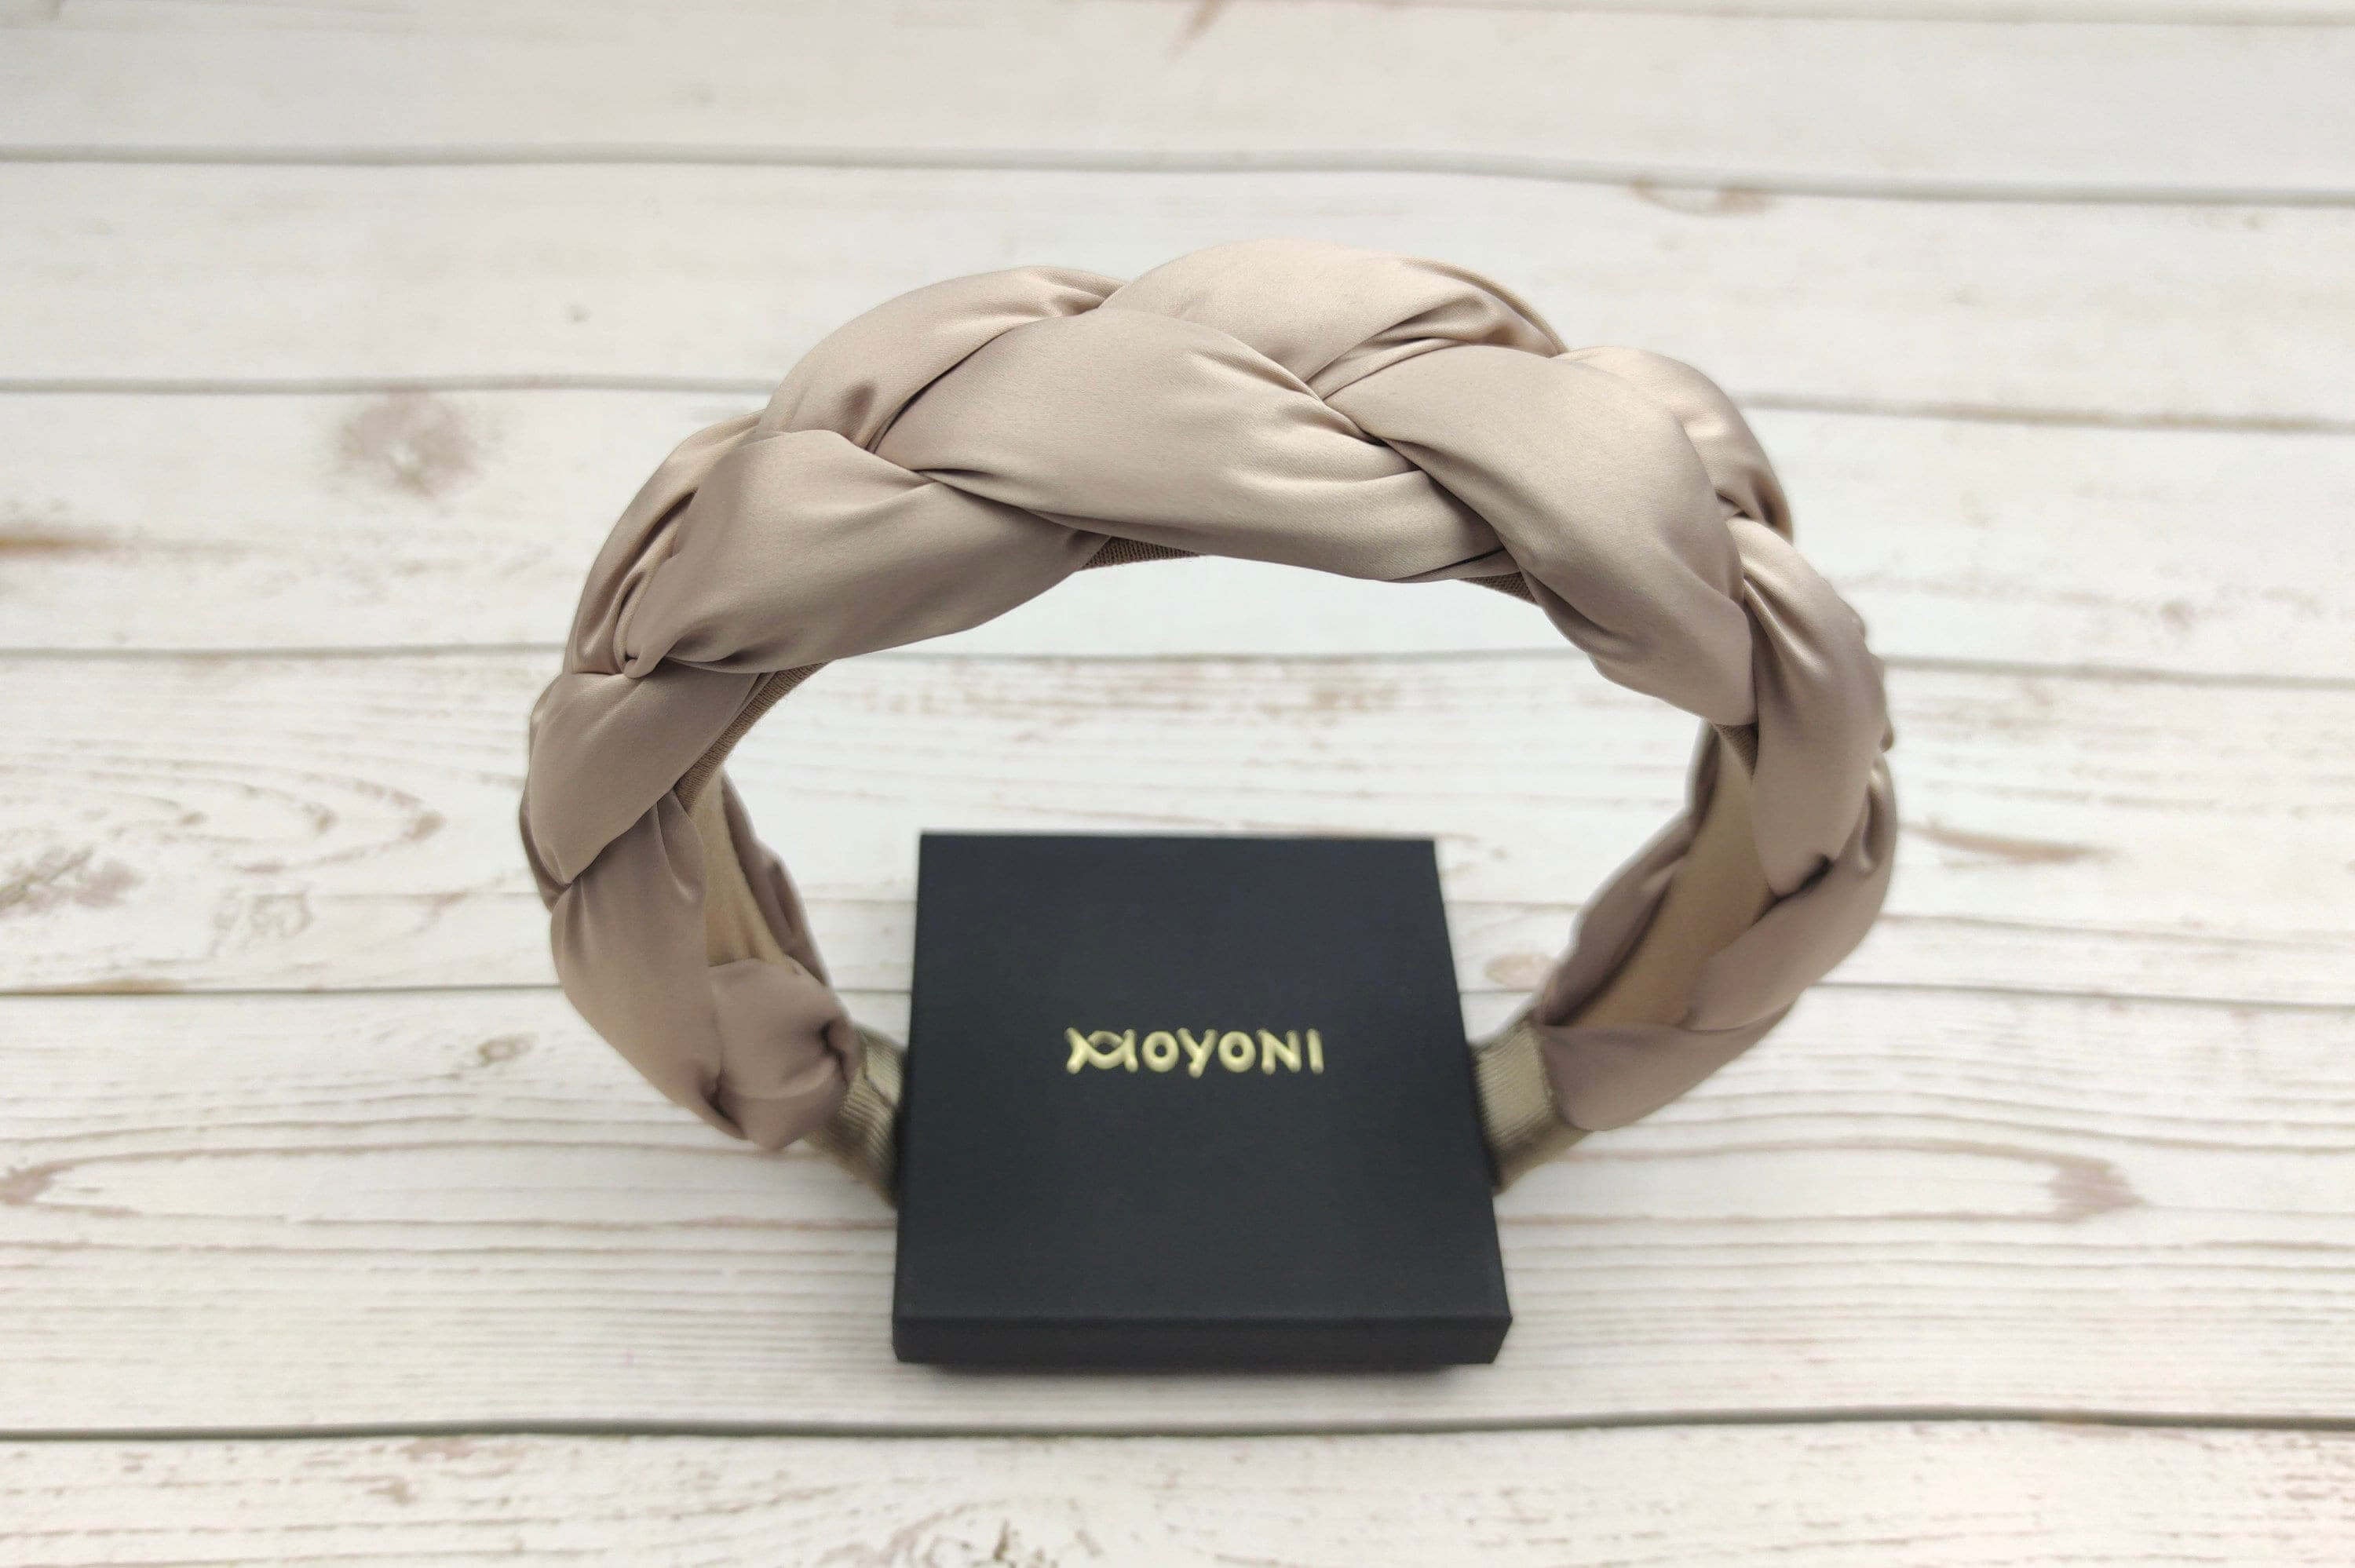 Spoil her with this luxurious beige satin headband, featuring a comfortable padded design.